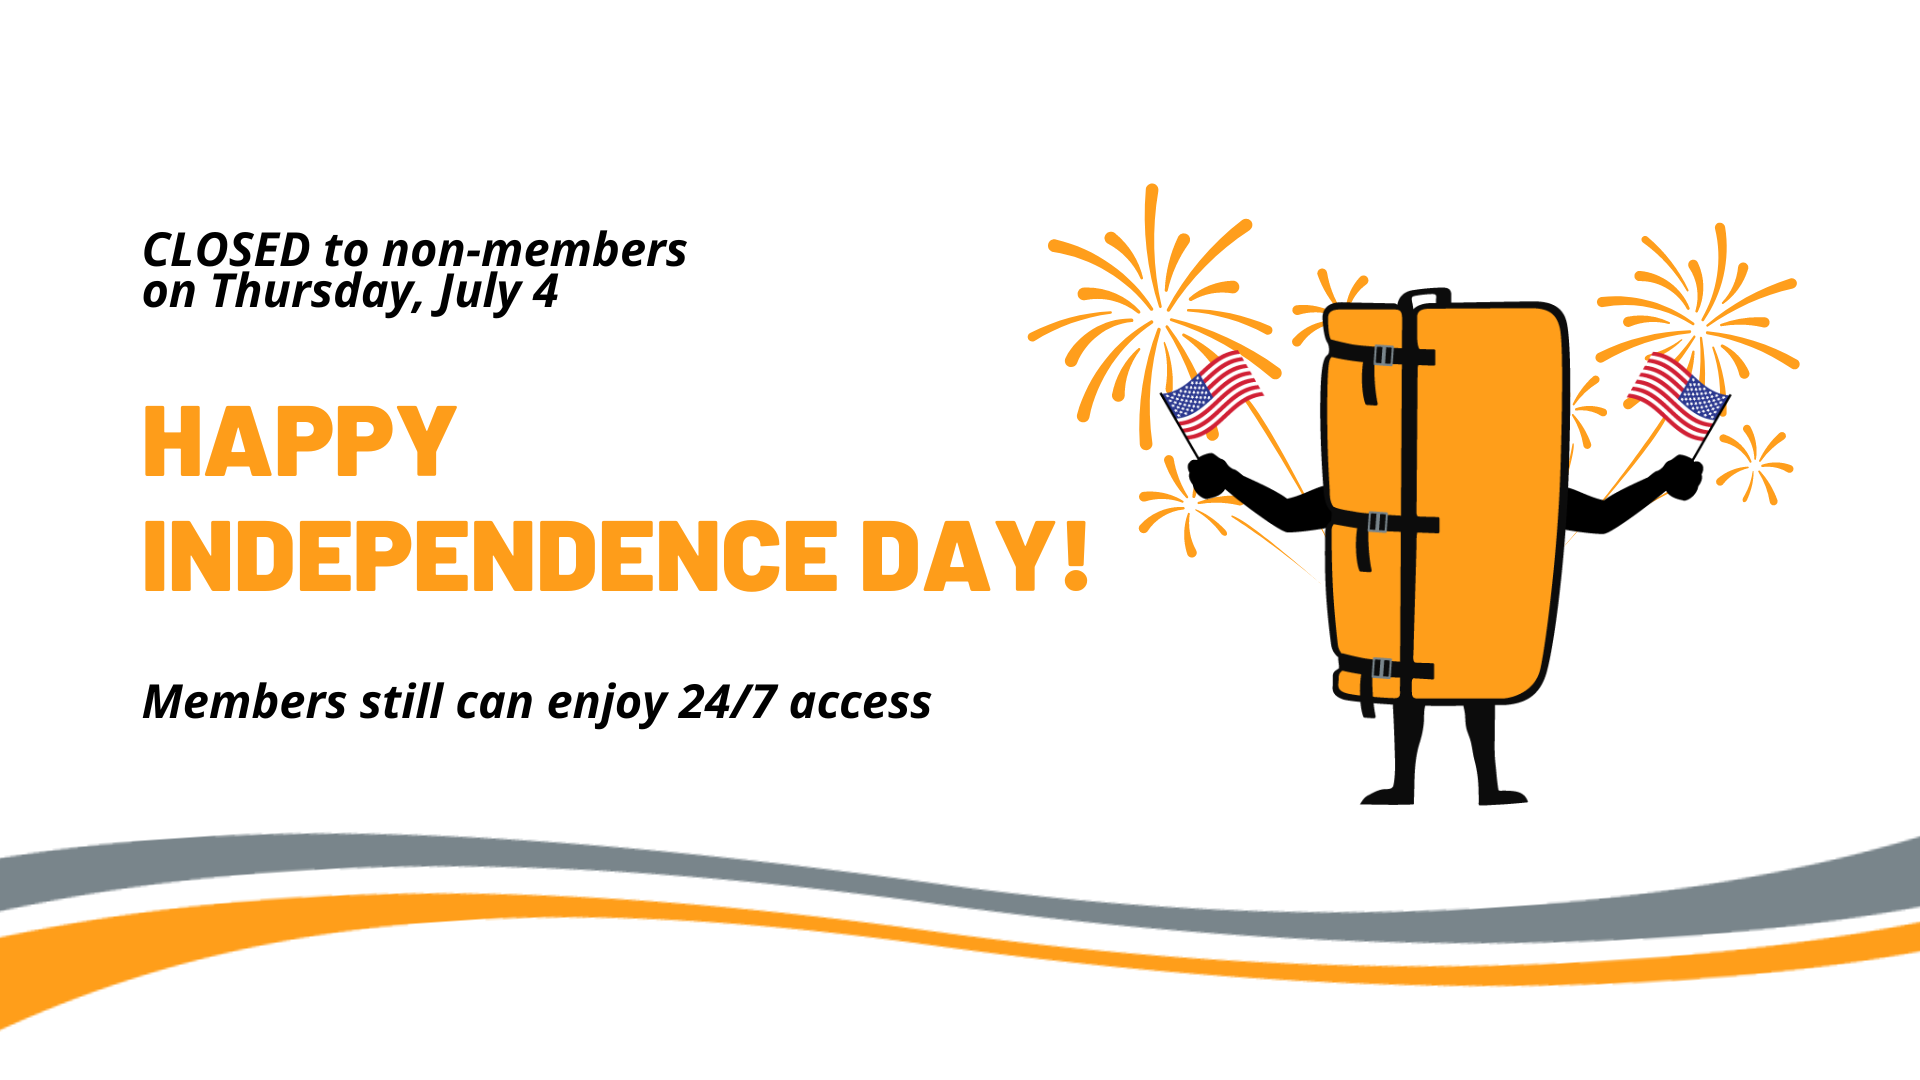 Closed to non members on Thursday, July 4. Happy Independence Day! 24/7 access still available for non-members.